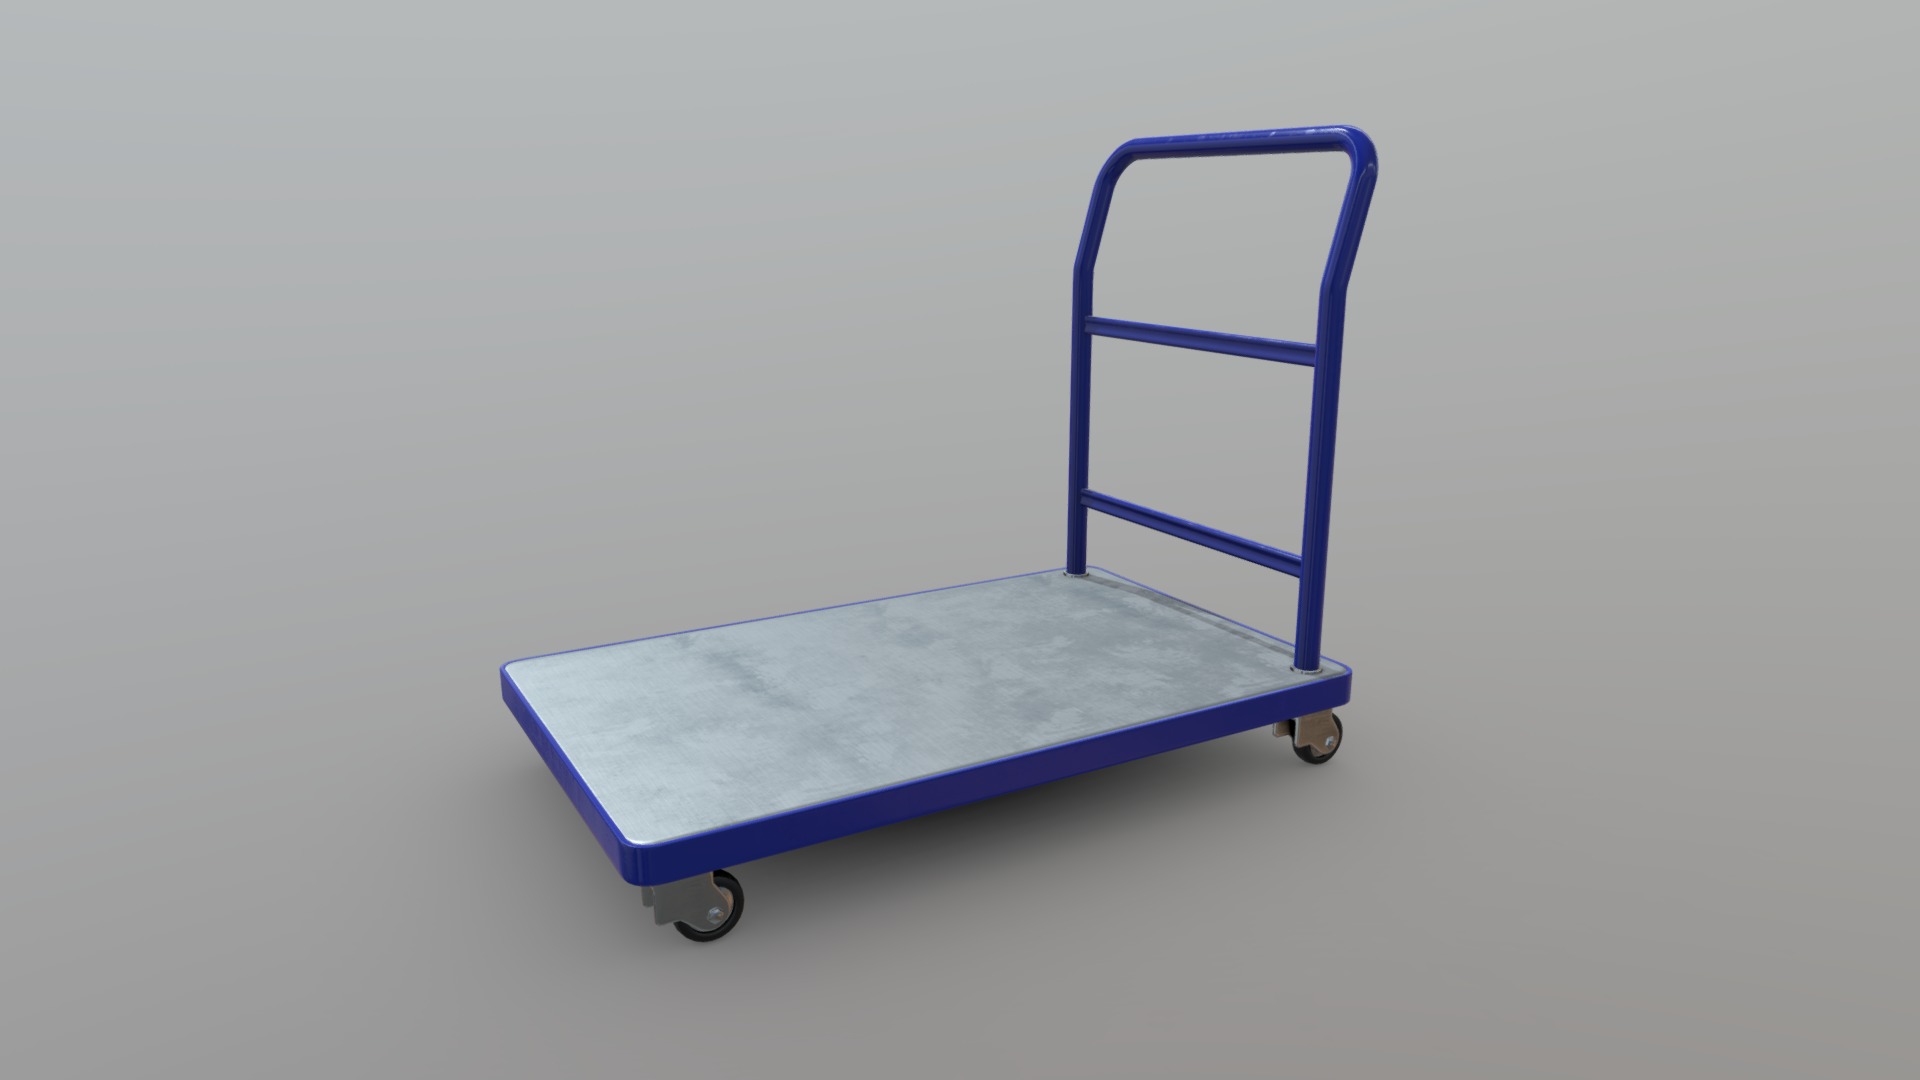 3D model Platform Truck - This is a 3D model of the Platform Truck. The 3D model is about a blue chair on wheels.